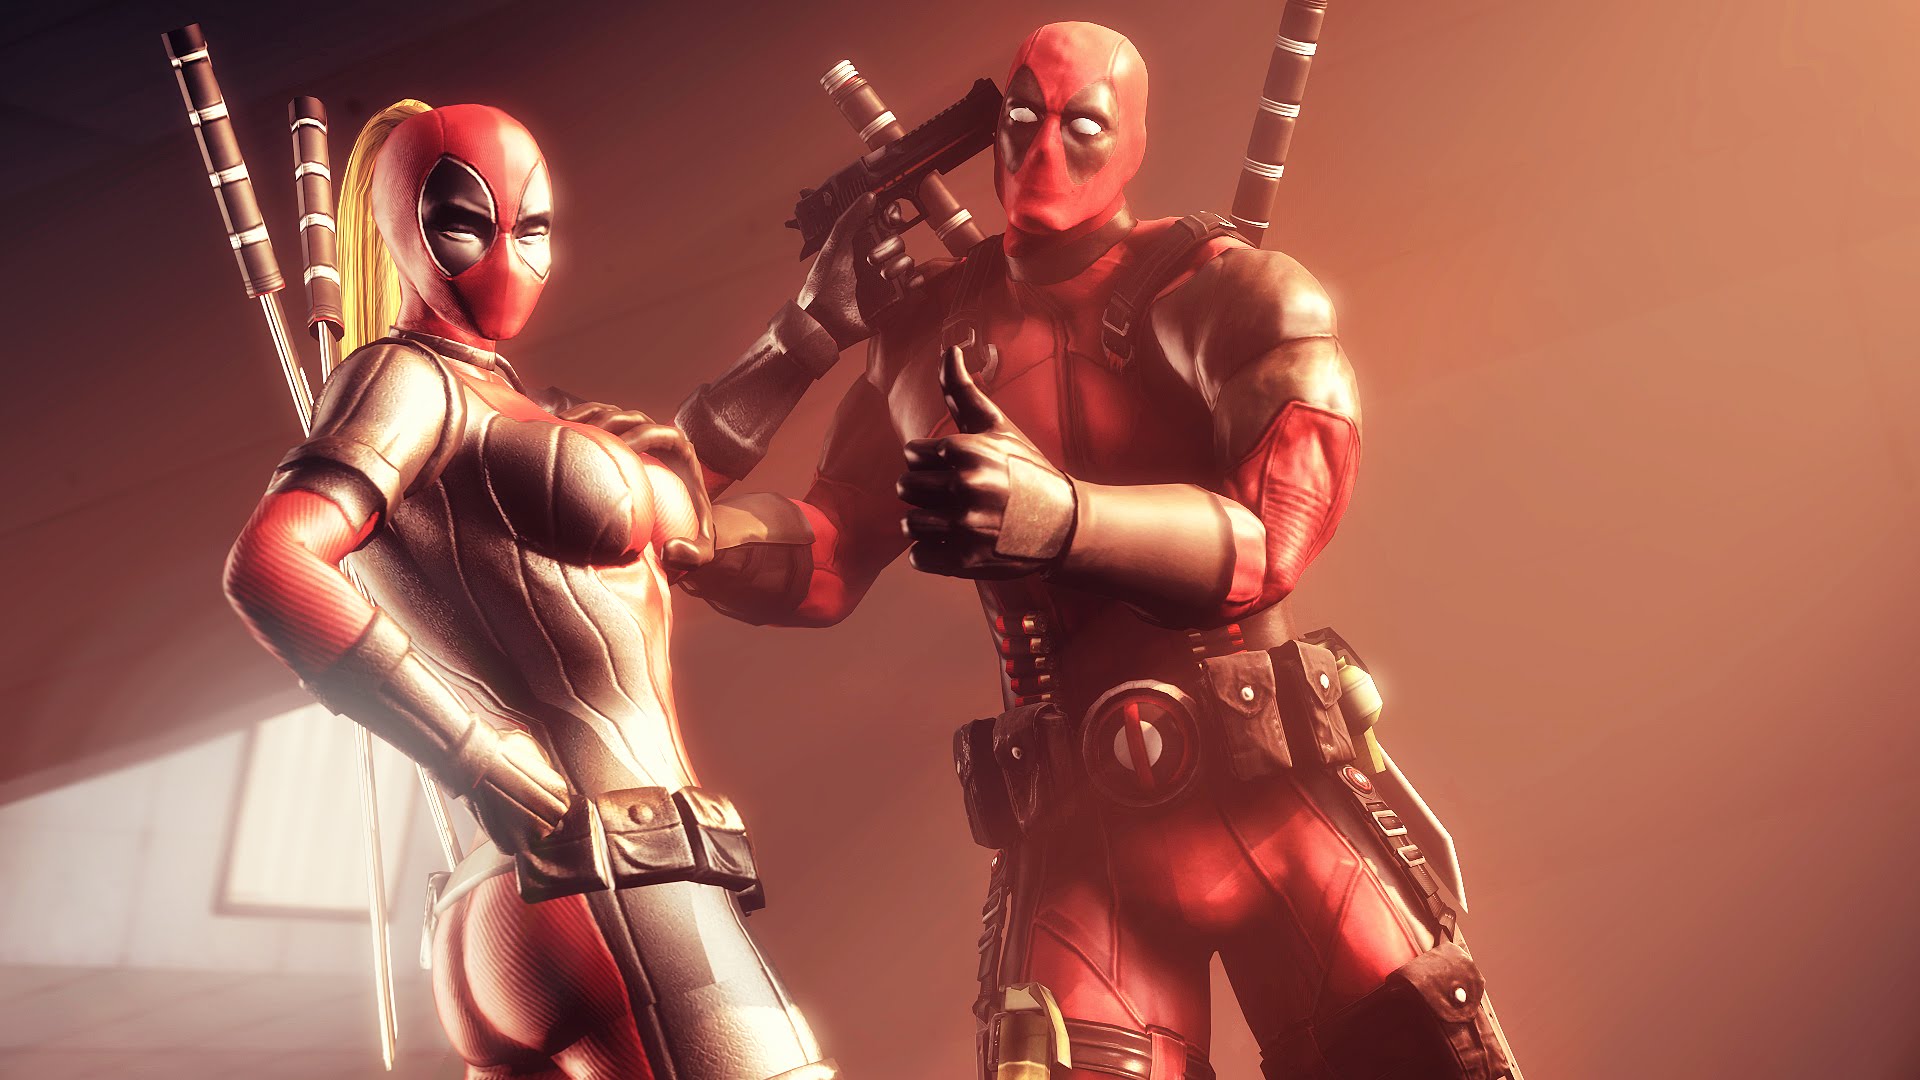 Nice wallpapers Lady Deadpool 1920x1080px